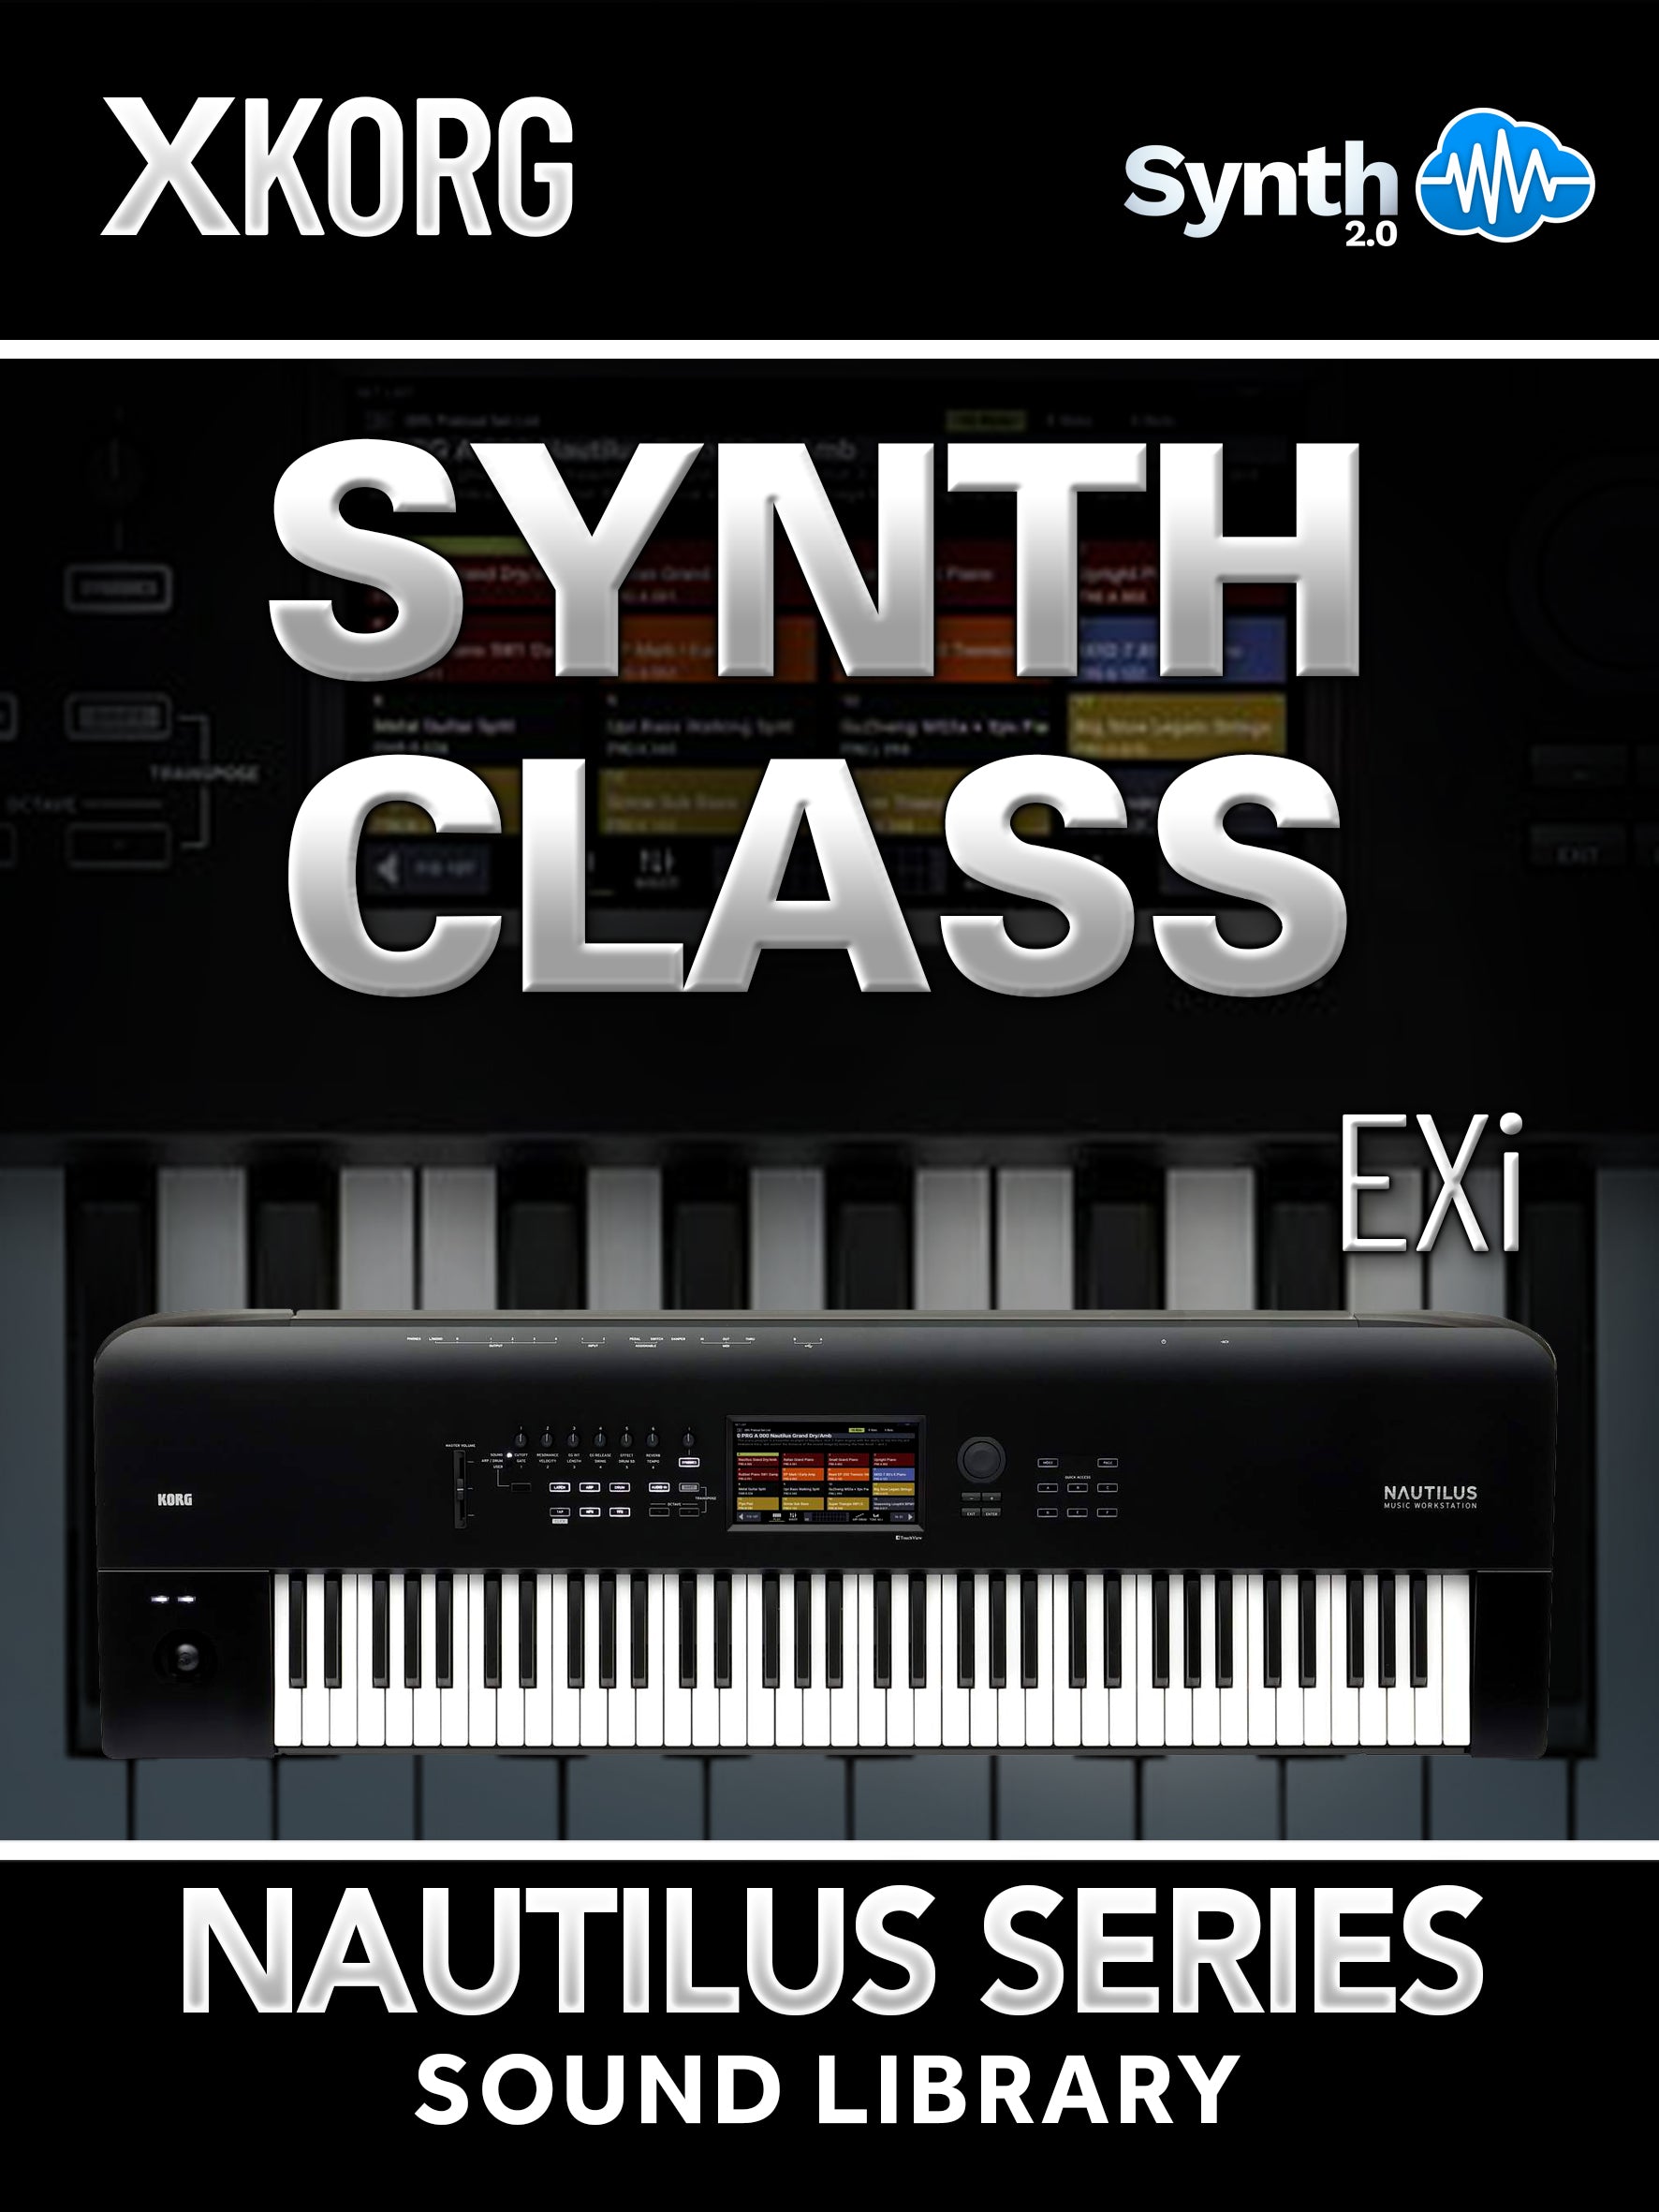 SSX138 - ( Bundle ) - Synth Class EXi + Super JD8 Reloaded - Korg Nautilus Series